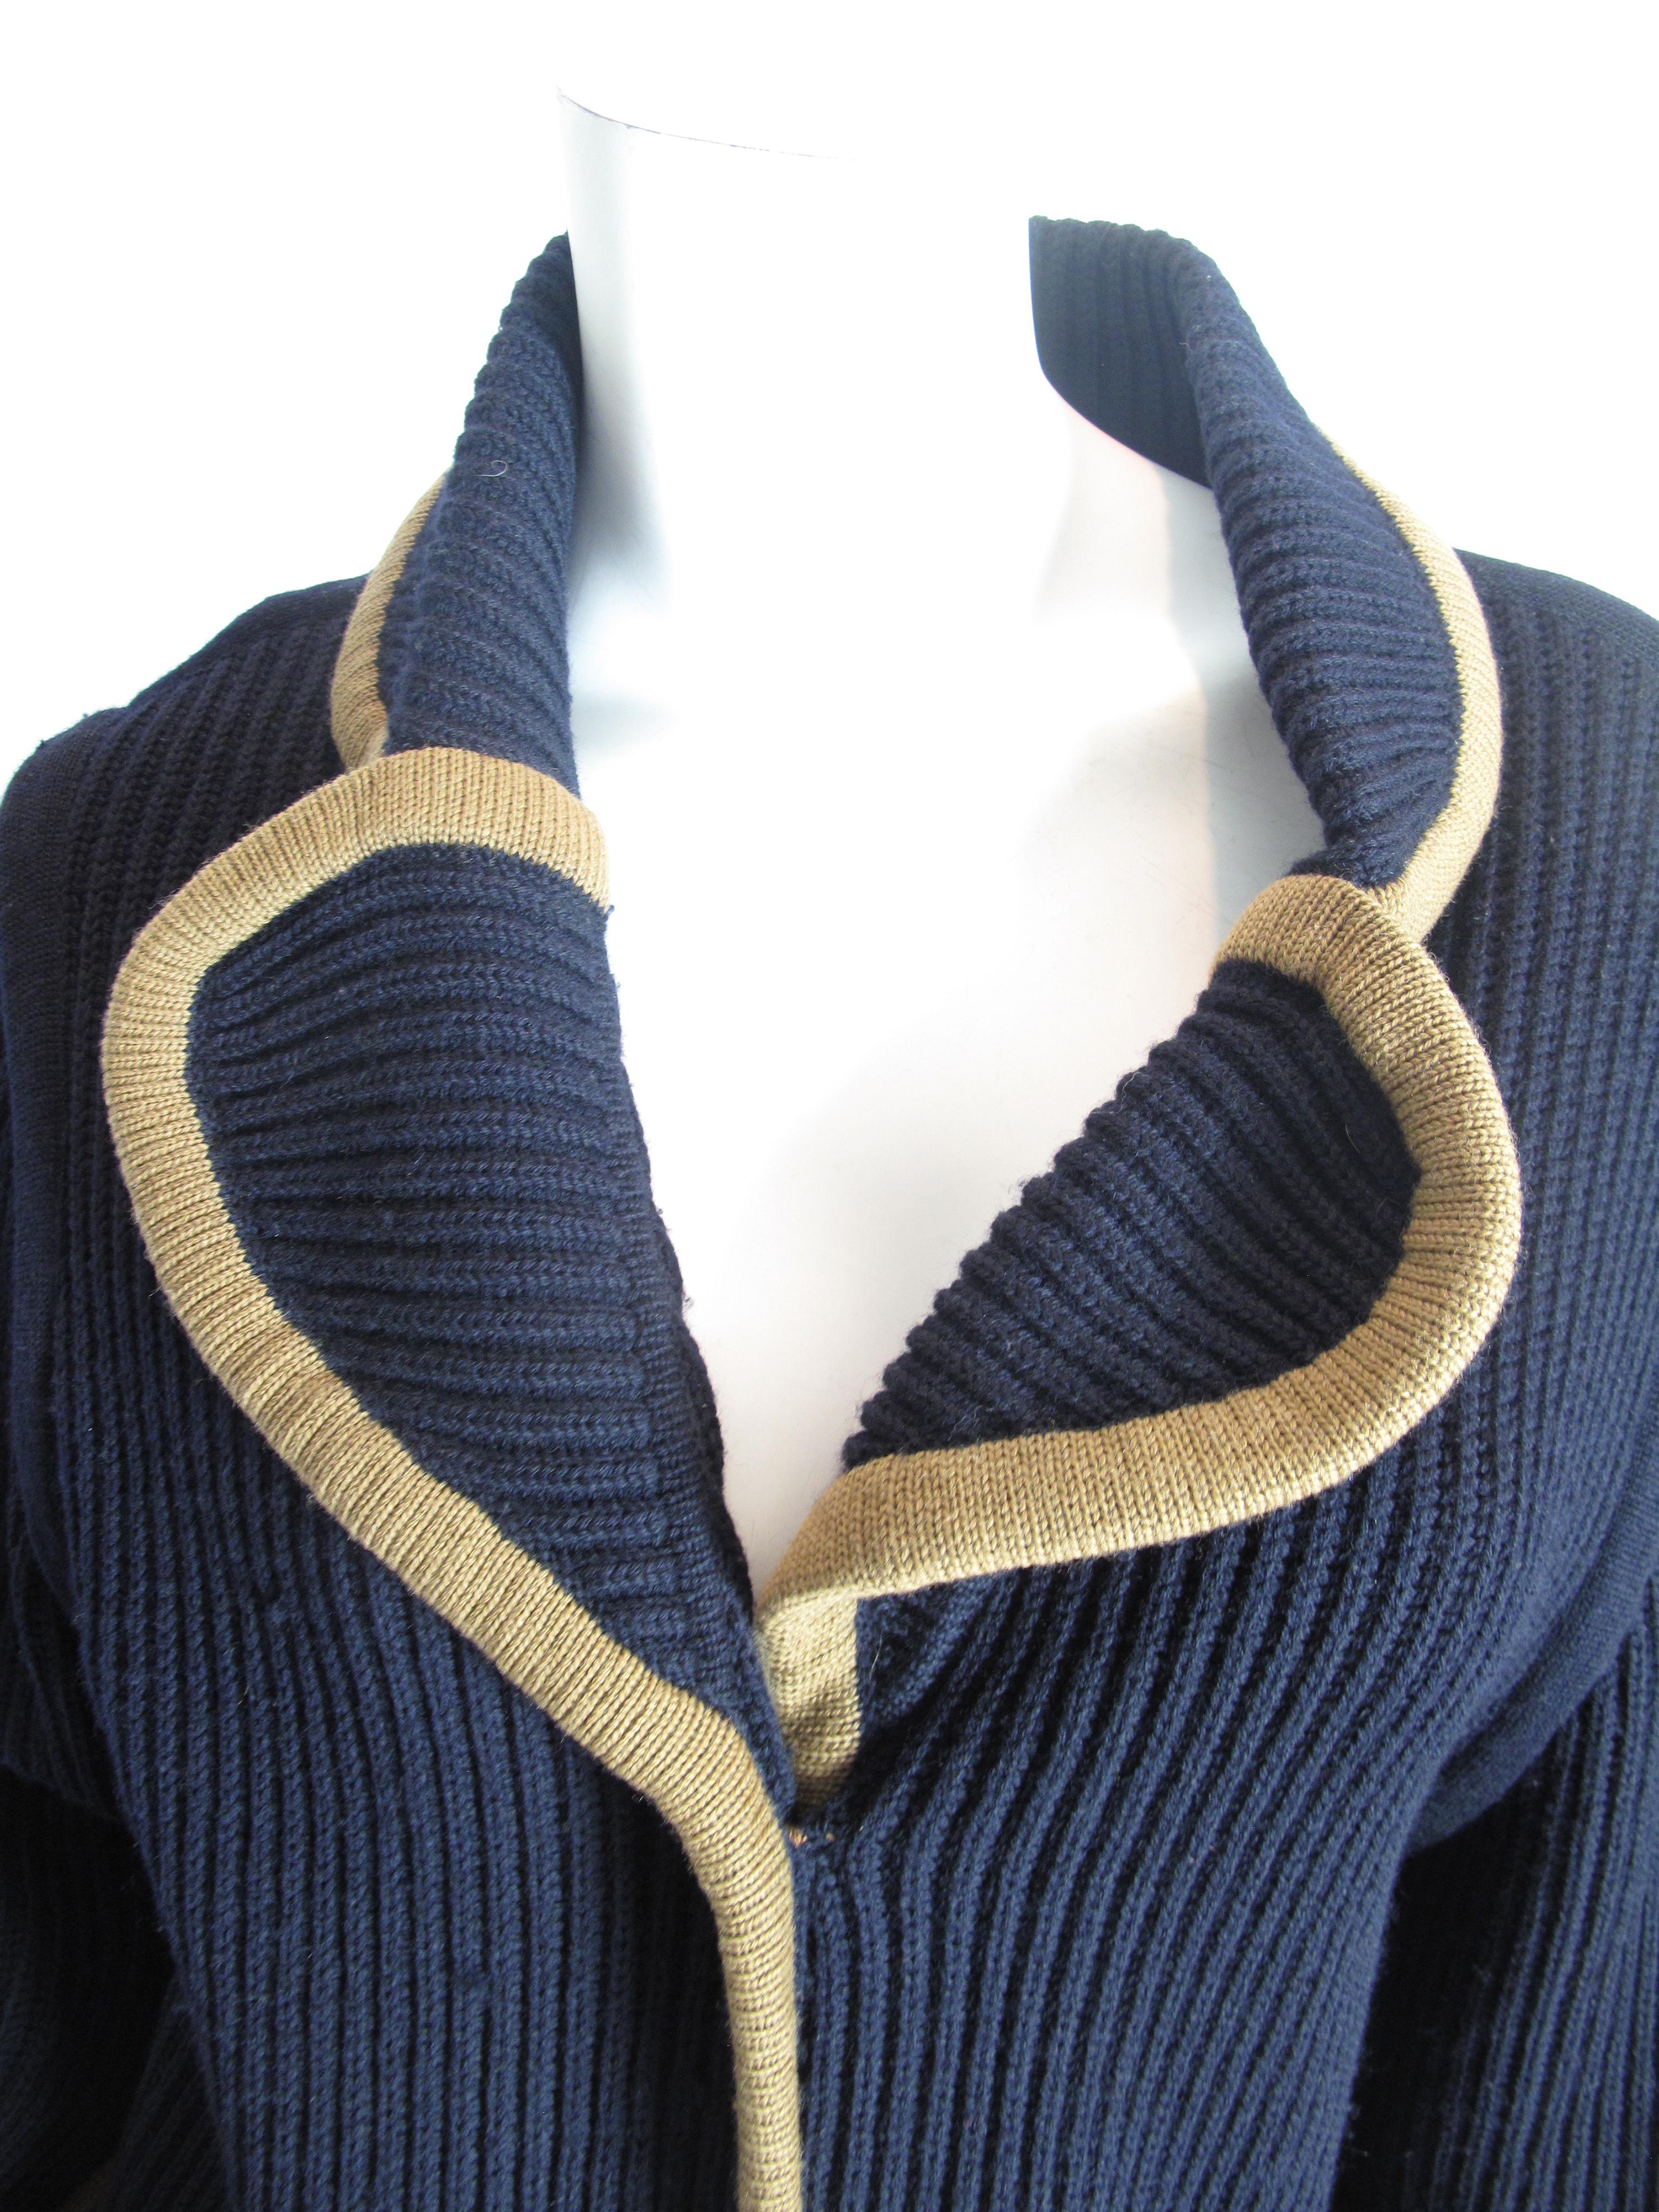 Hermes navy wool knit cardigan with tan trim, dual pockets and button closures at front.  Condition: Good, some small holes have been repaired. 

42